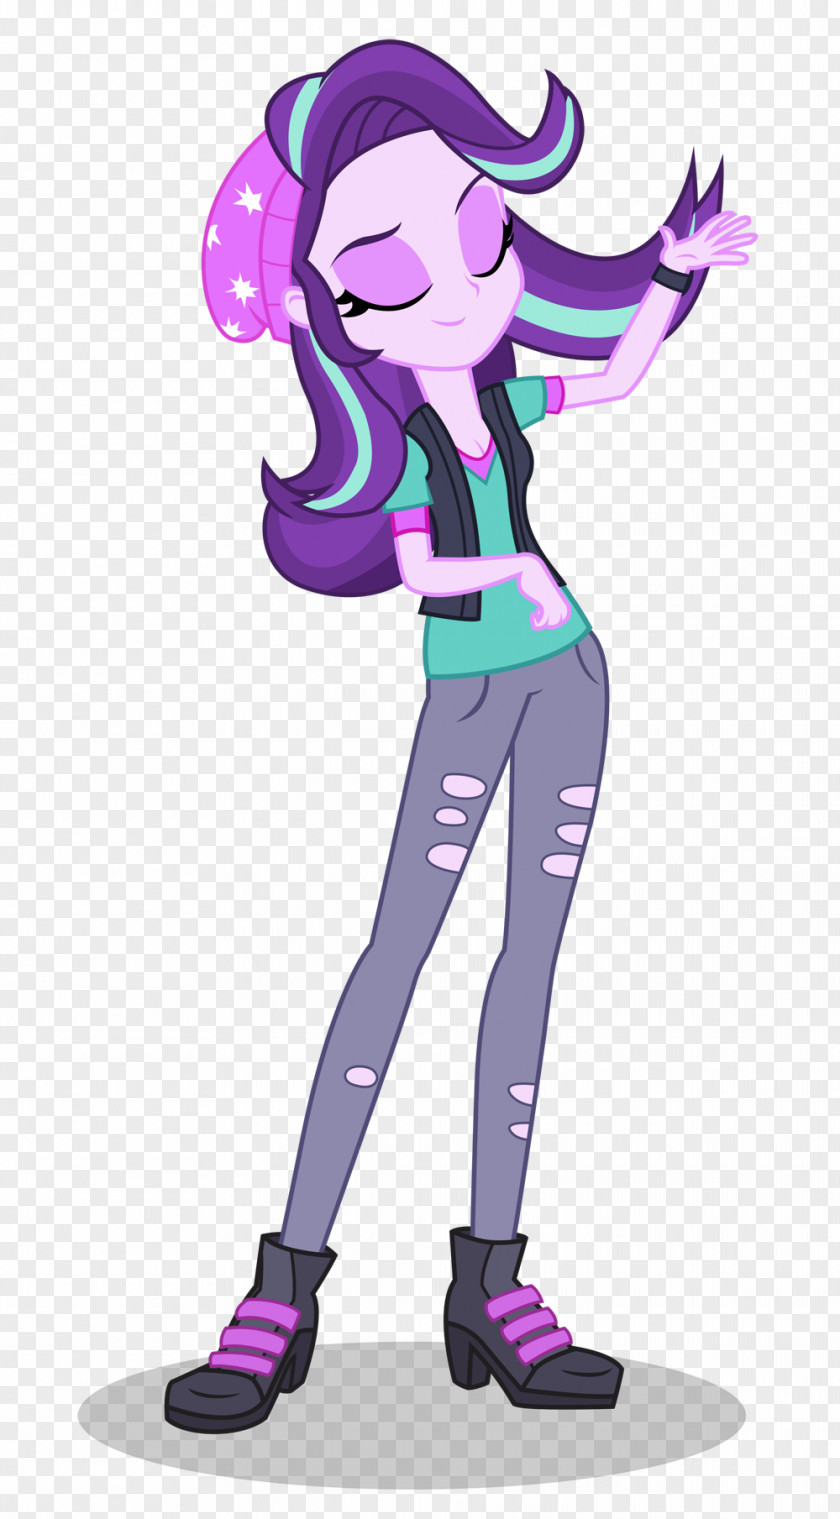 Star Light Twilight Sparkle My Little Pony: Equestria Girls Pinkie Pie Sunset Shimmer PNG